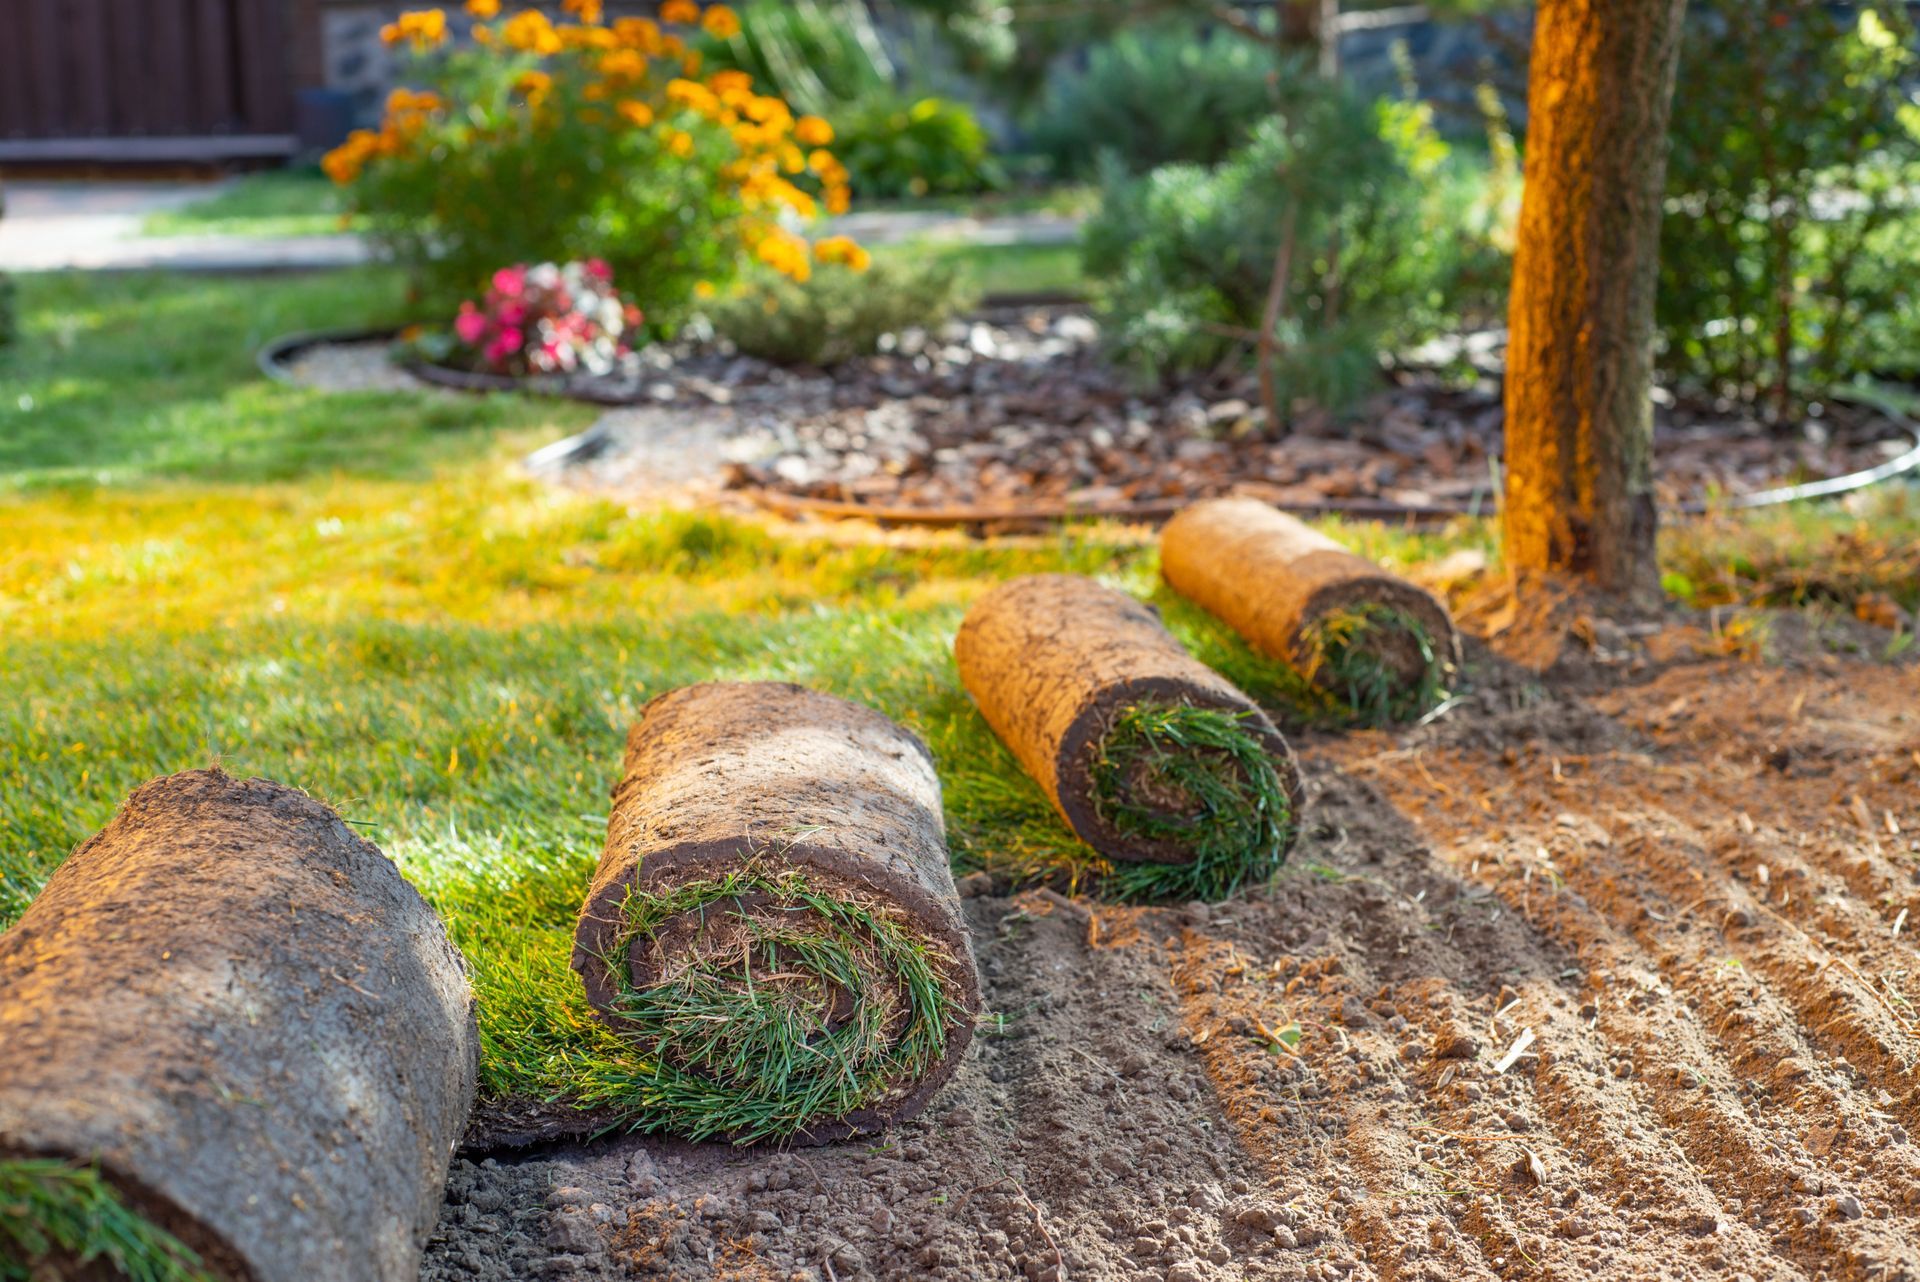 three rolls of turf are sitting on top of a pile of dirt in a garden .